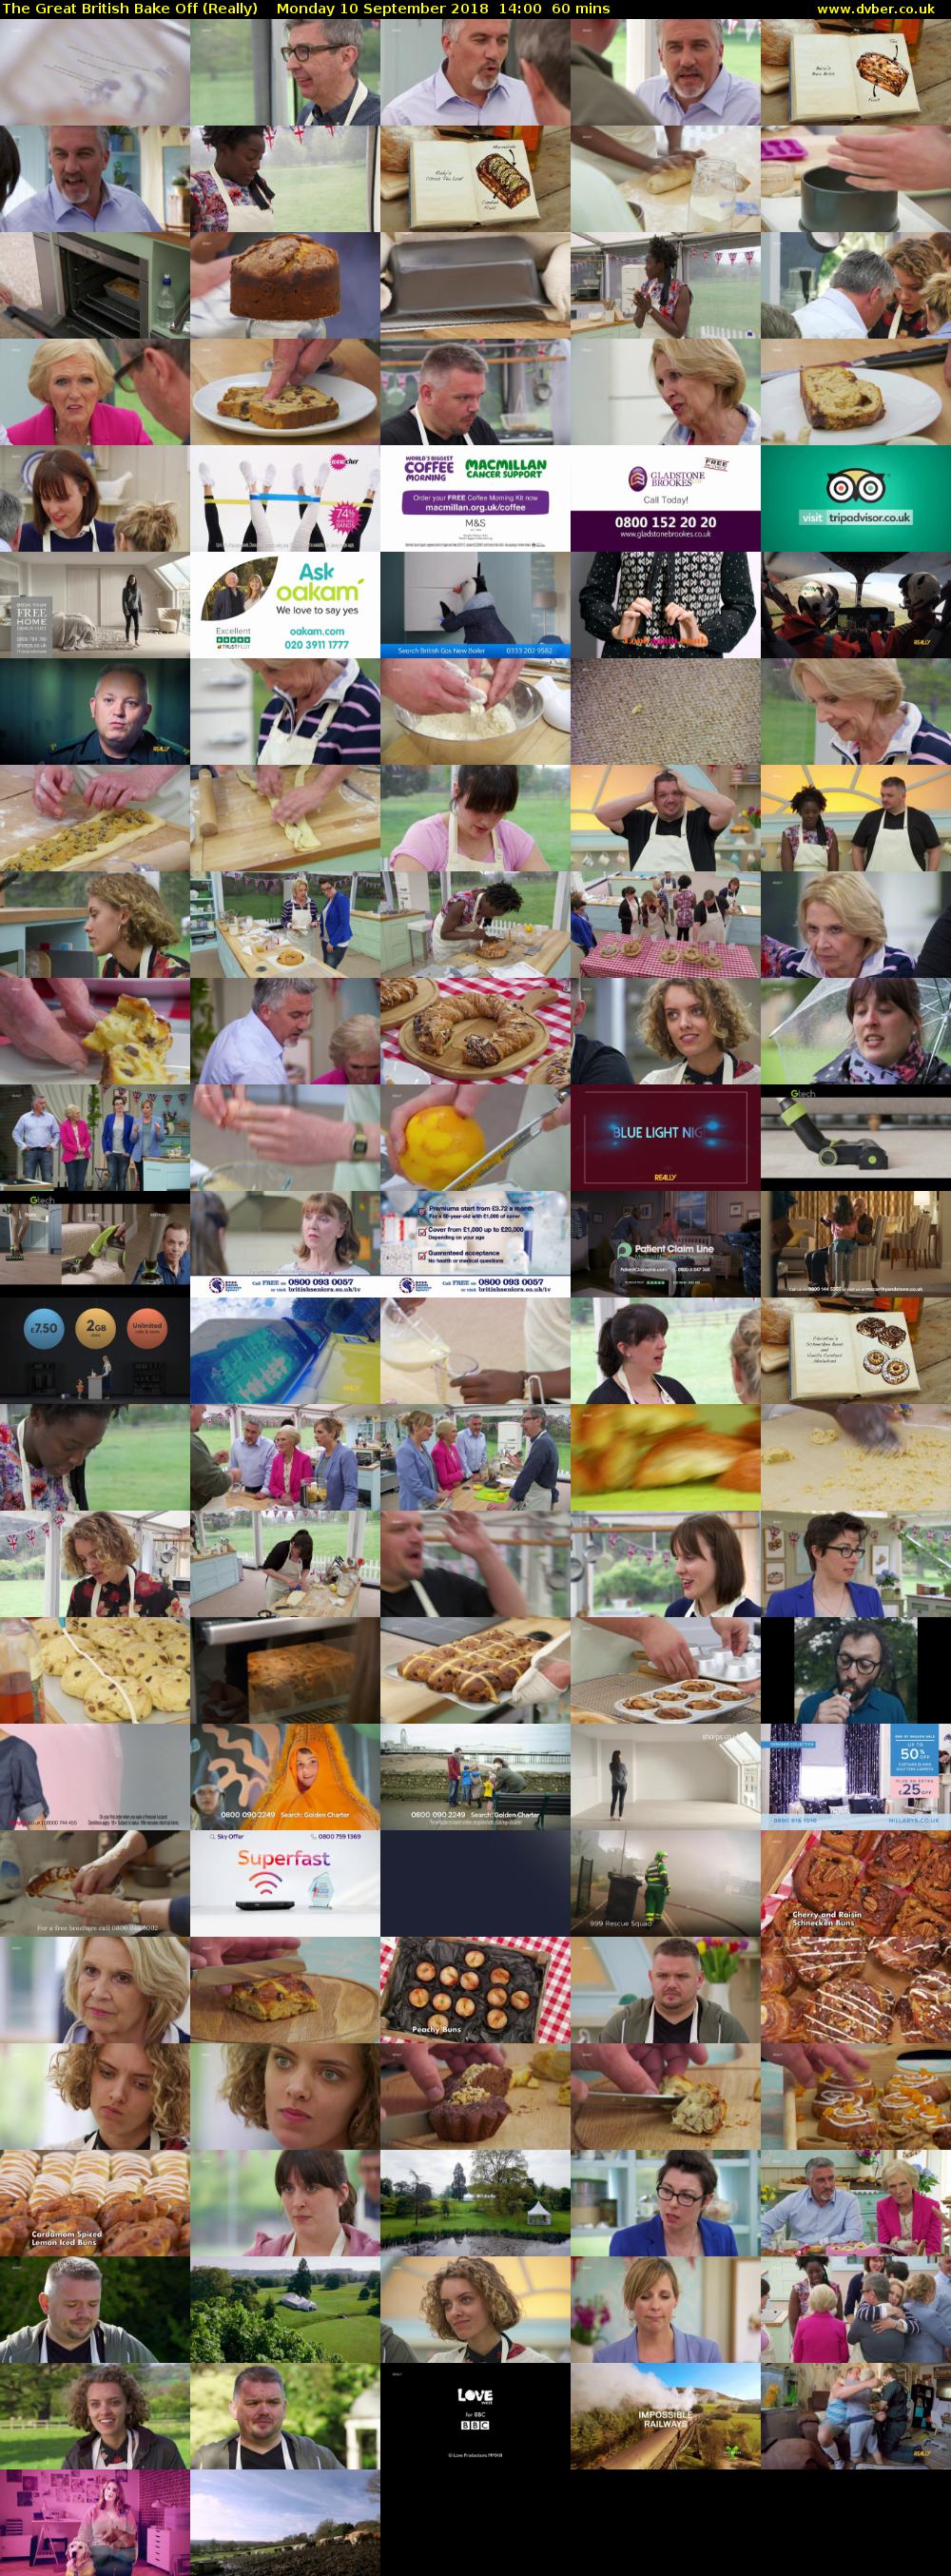 The Great British Bake Off (Really) Monday 10 September 2018 14:00 - 15:00